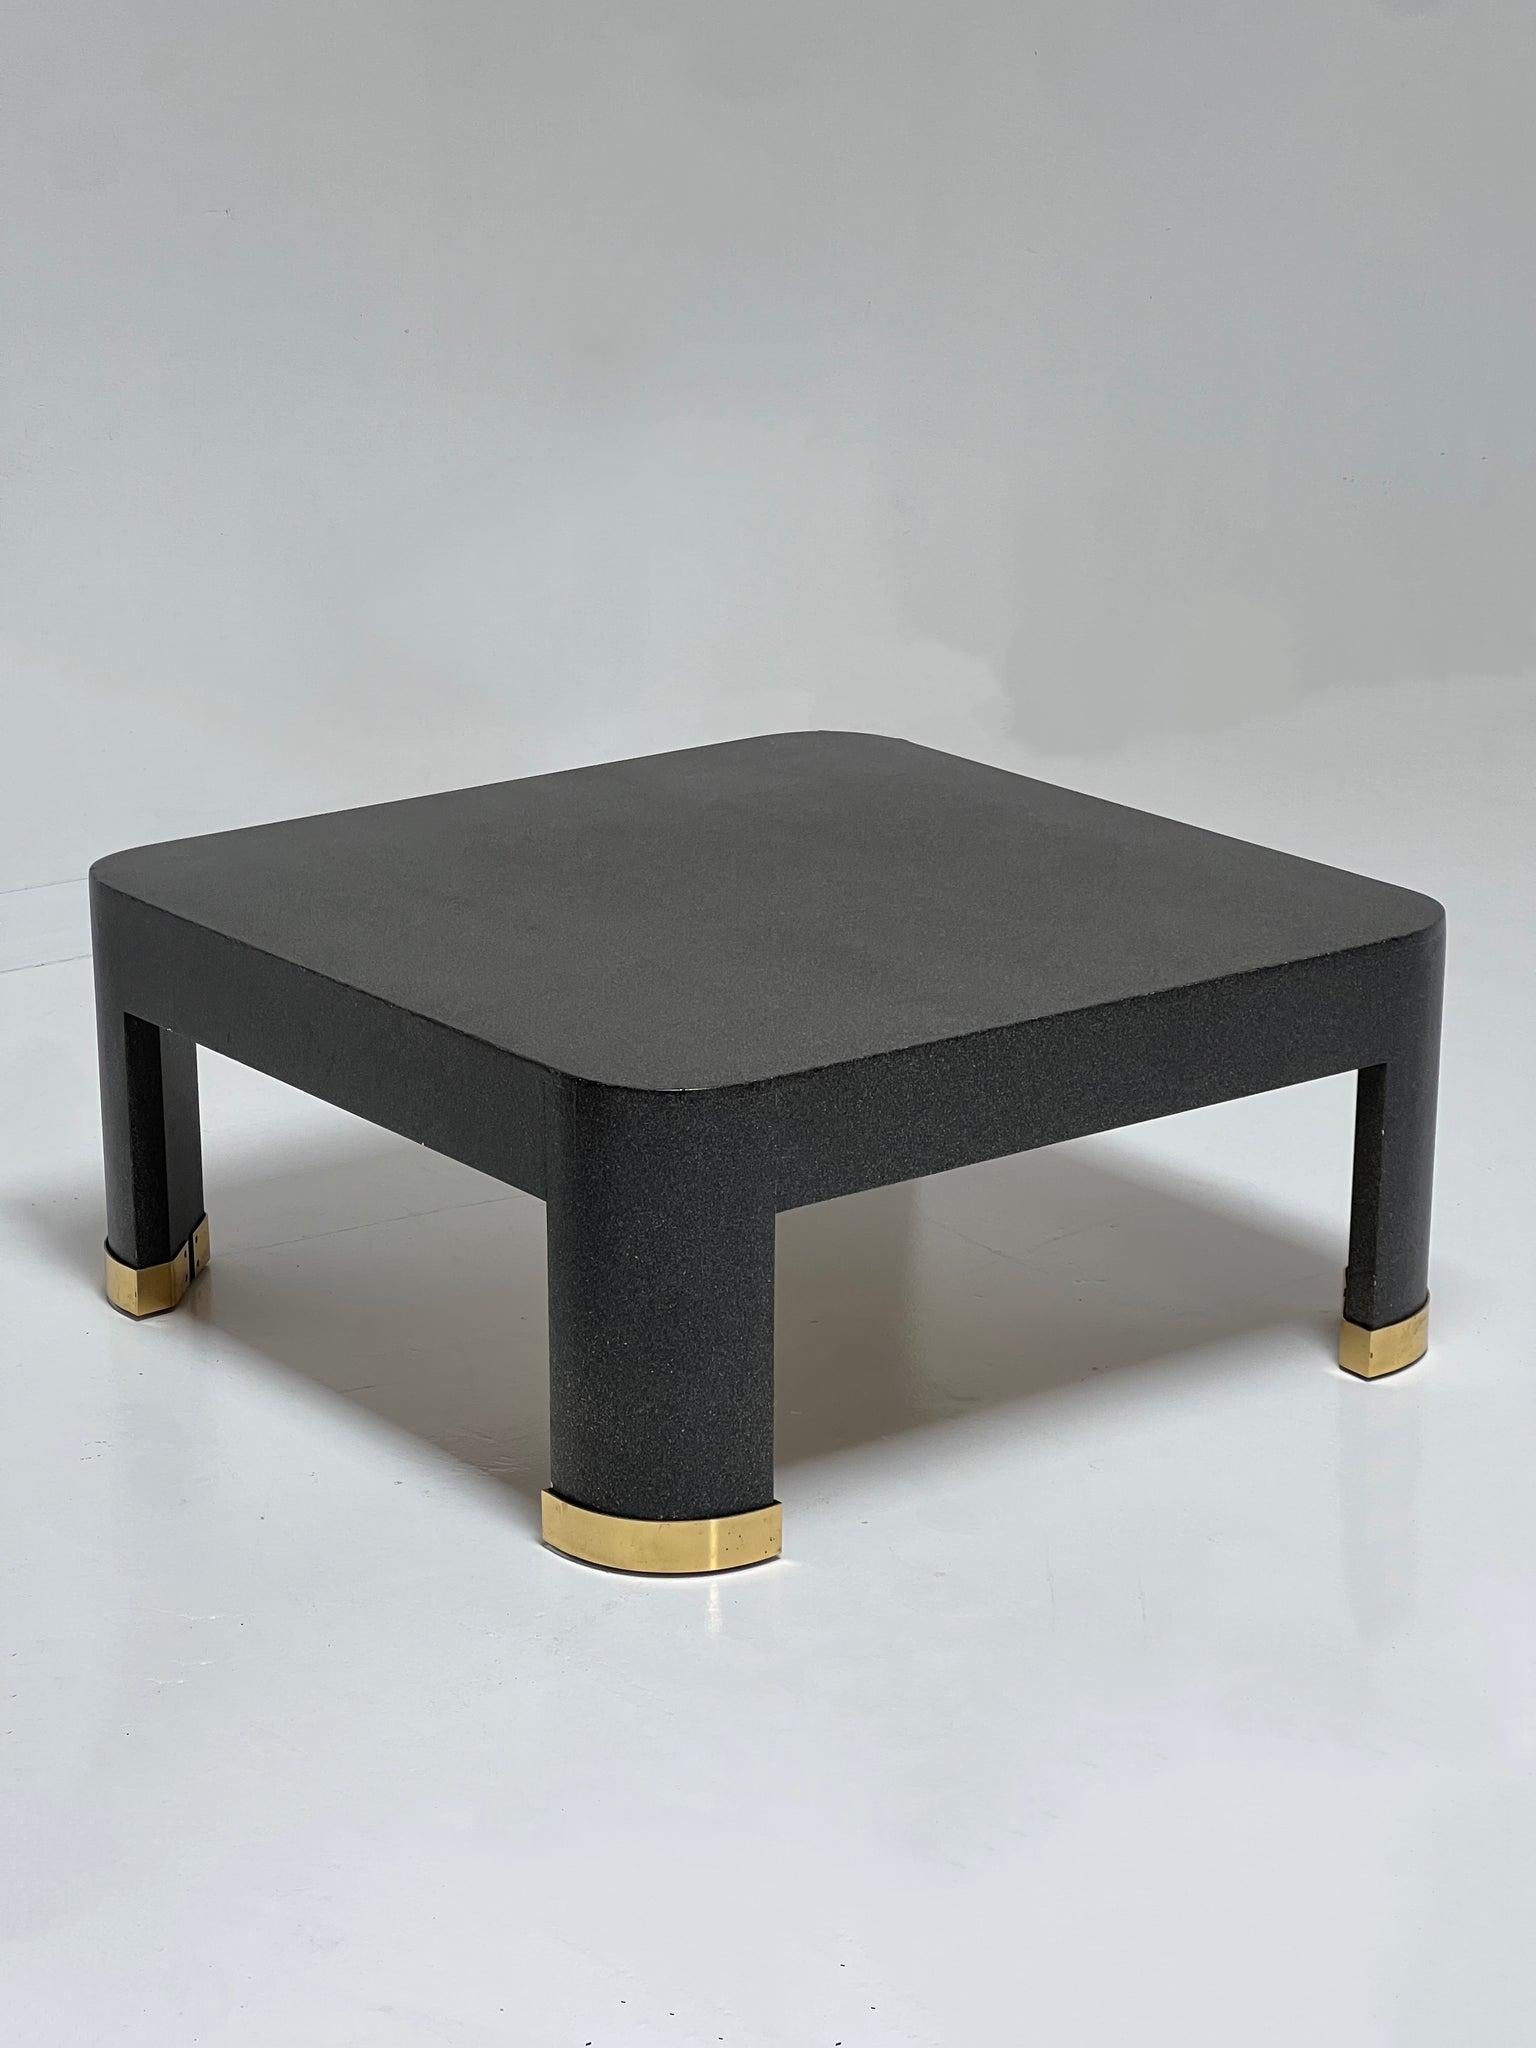 Dark Grey Karl Springer Coffee Table with Brass Detail in great condition with light signs of wear along the edges. 

Unmarked. 

Dimensions:

Width - 42”

Height - 18”

Pick-up and Delivery Options: 
FREE PICK-UP from our warehouse in South San